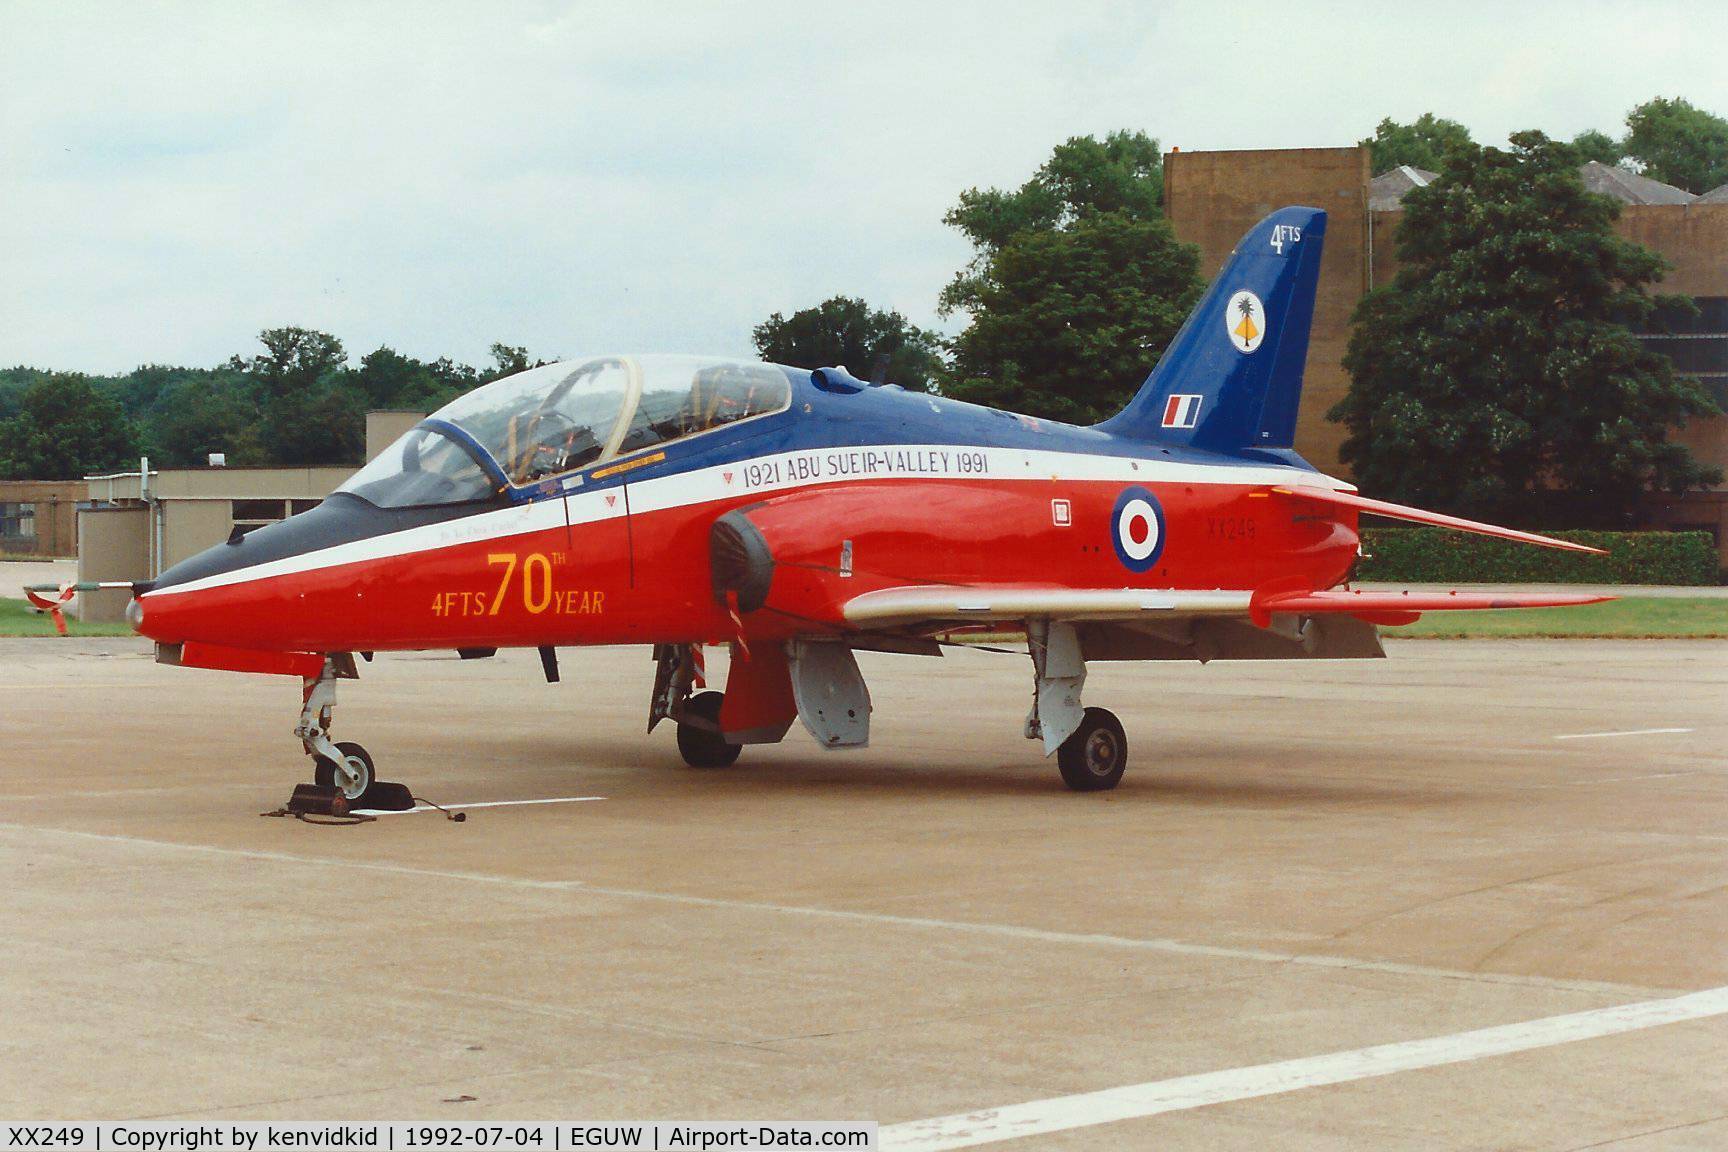 XX249, 1978 Hawker Siddeley Hawk T.1 C/N 085/312085, At the Phantom Phinale photocall.